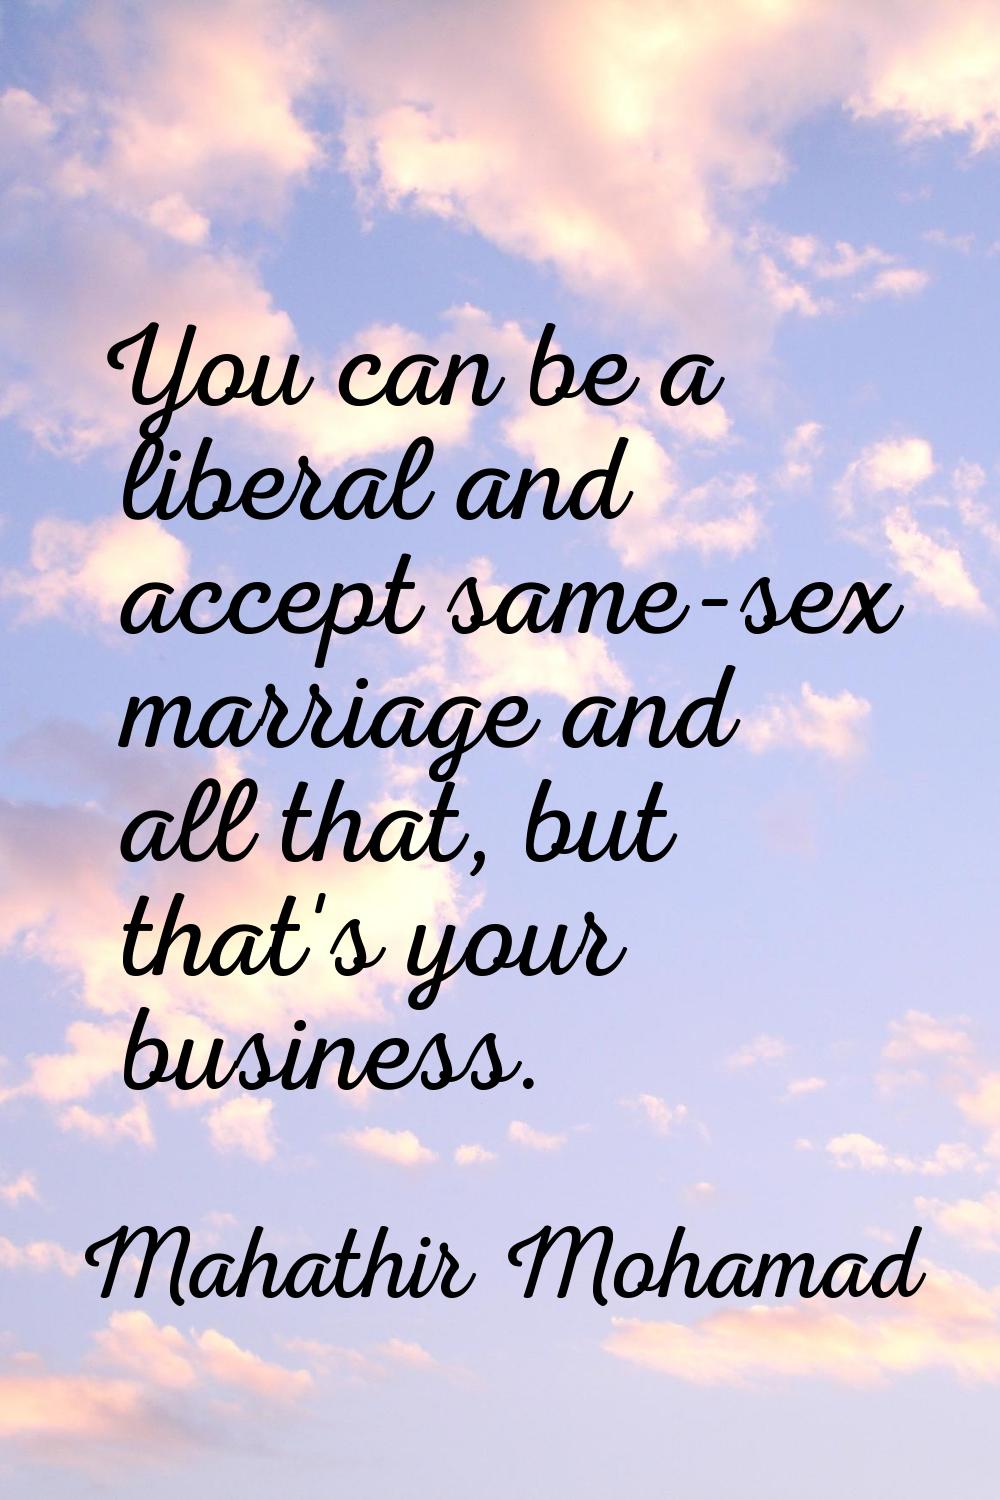 You can be a liberal and accept same-sex marriage and all that, but that's your business.